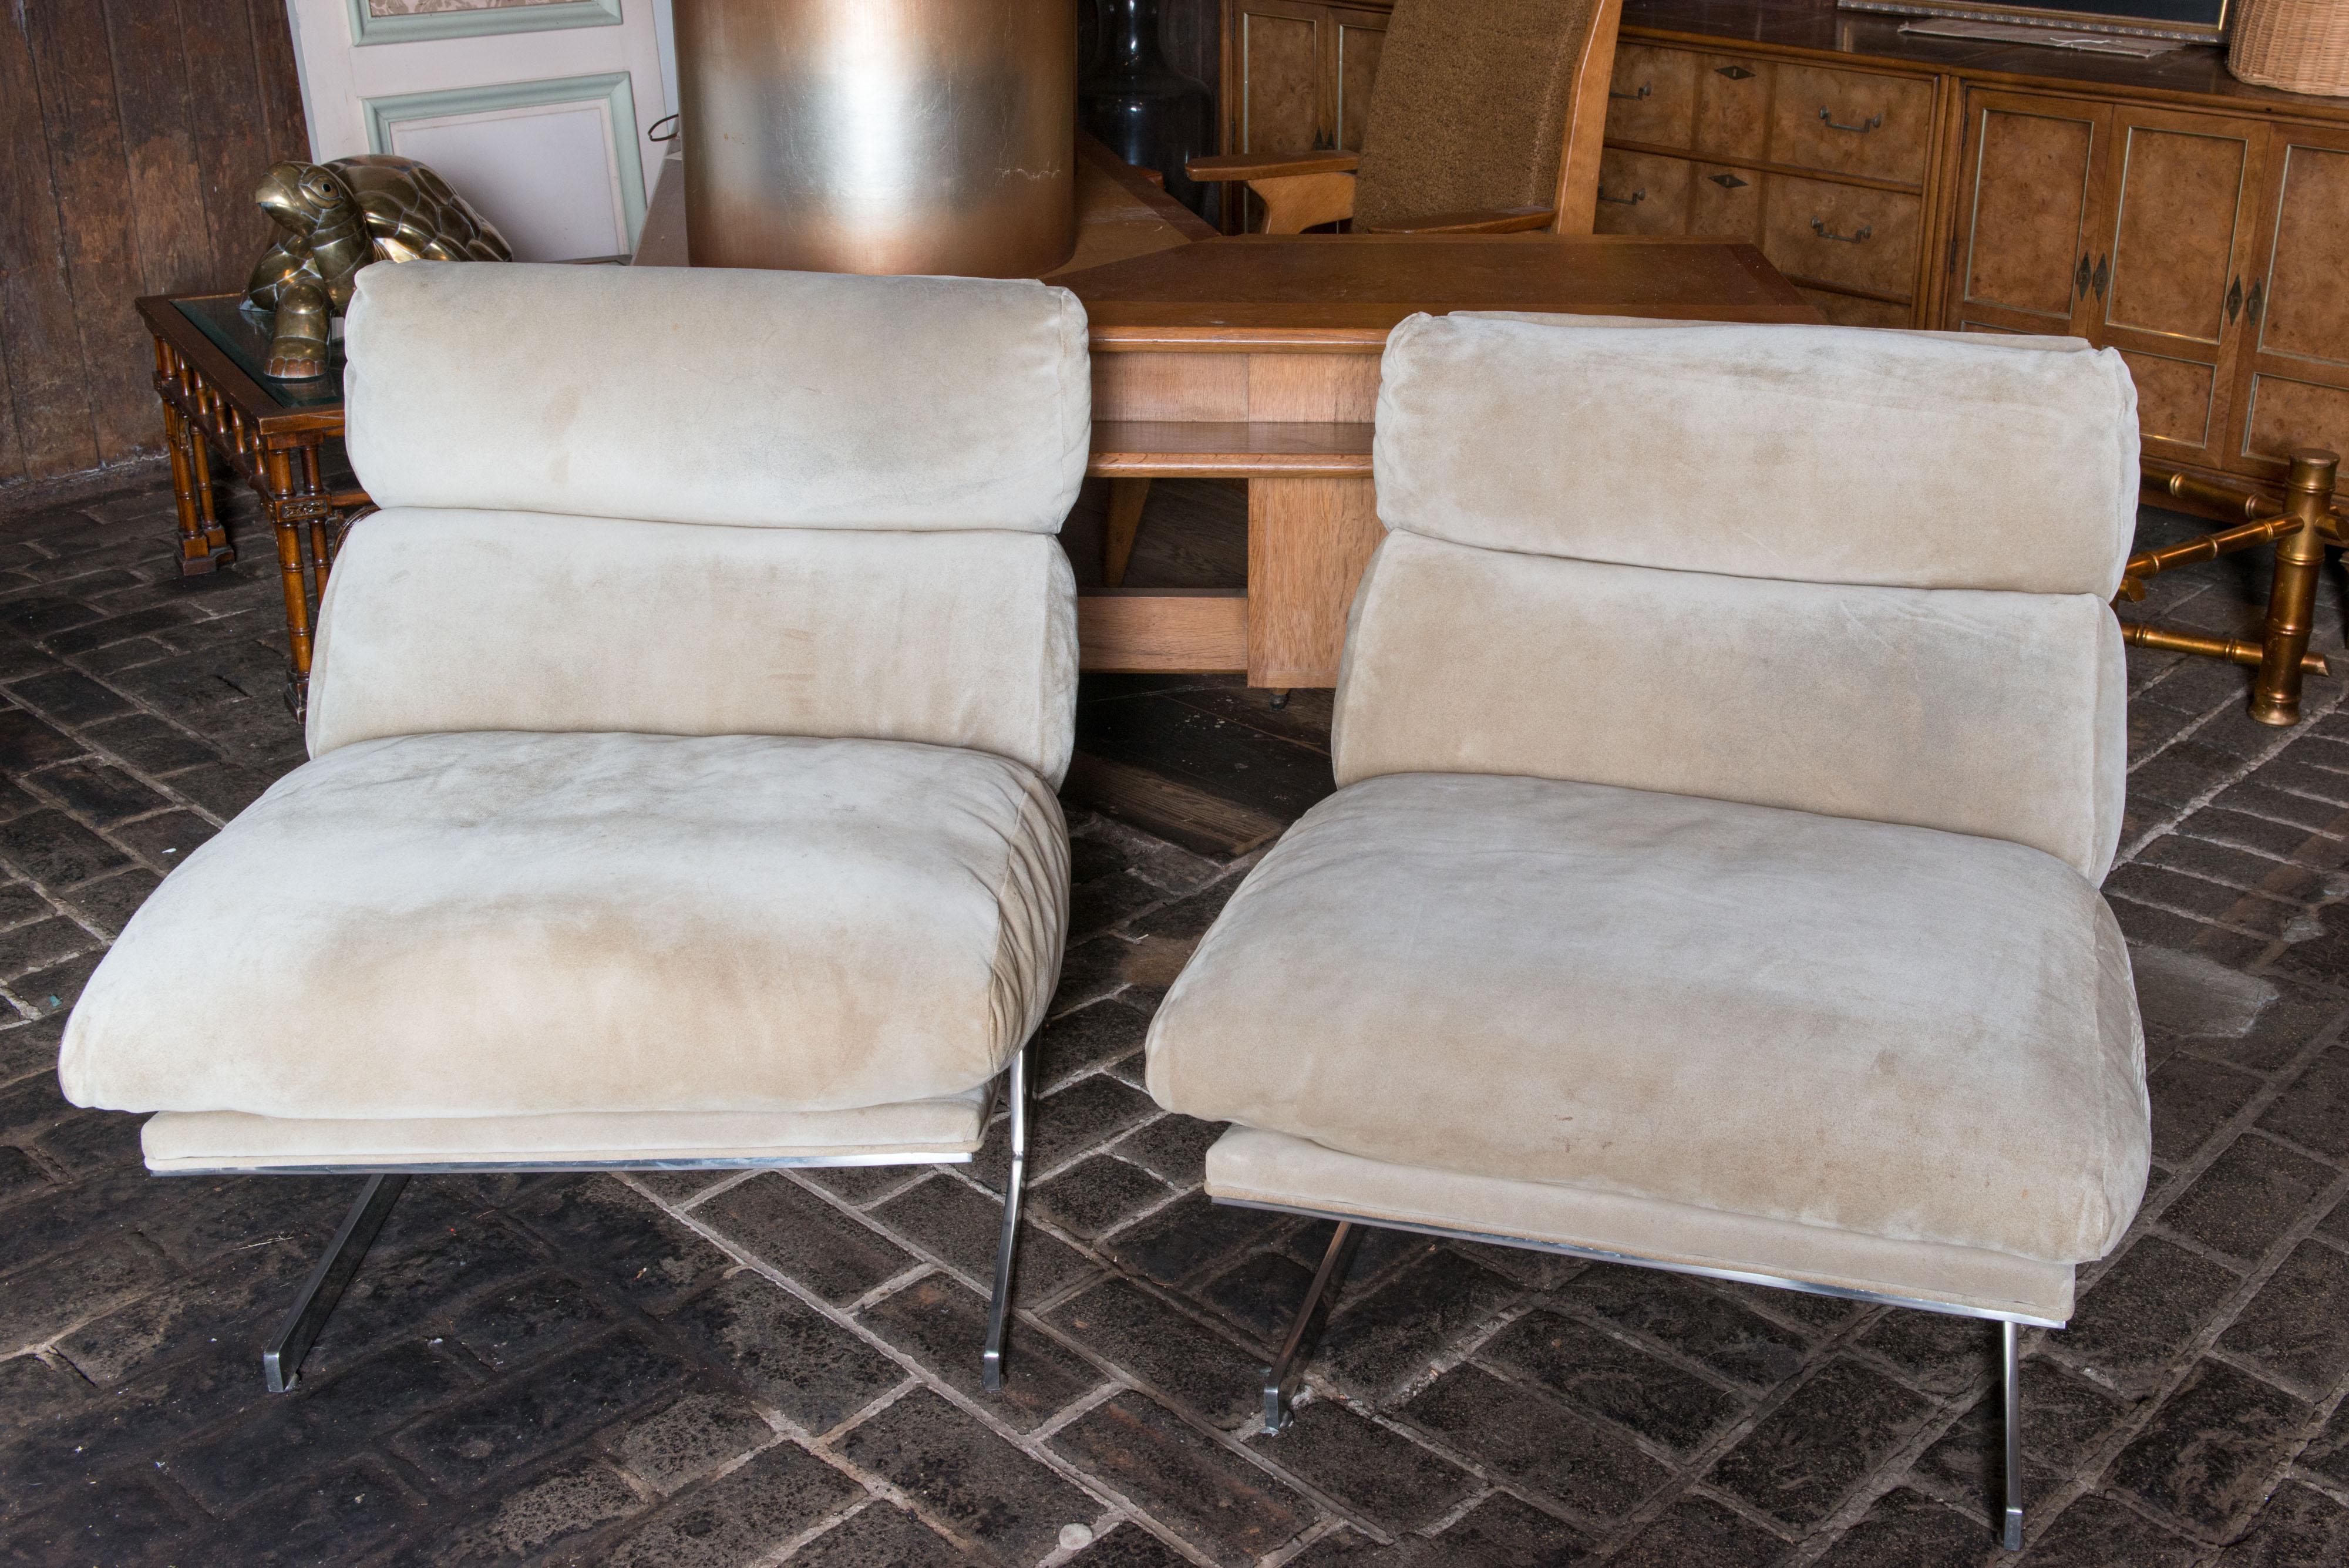 A comfortable and sophisticated pair of lounge chairs designed by Kipp Stewart in the 1970s for Directional. The streamlined steel base is chrome plated. The upholstery is off white suede in remarkably great condition.